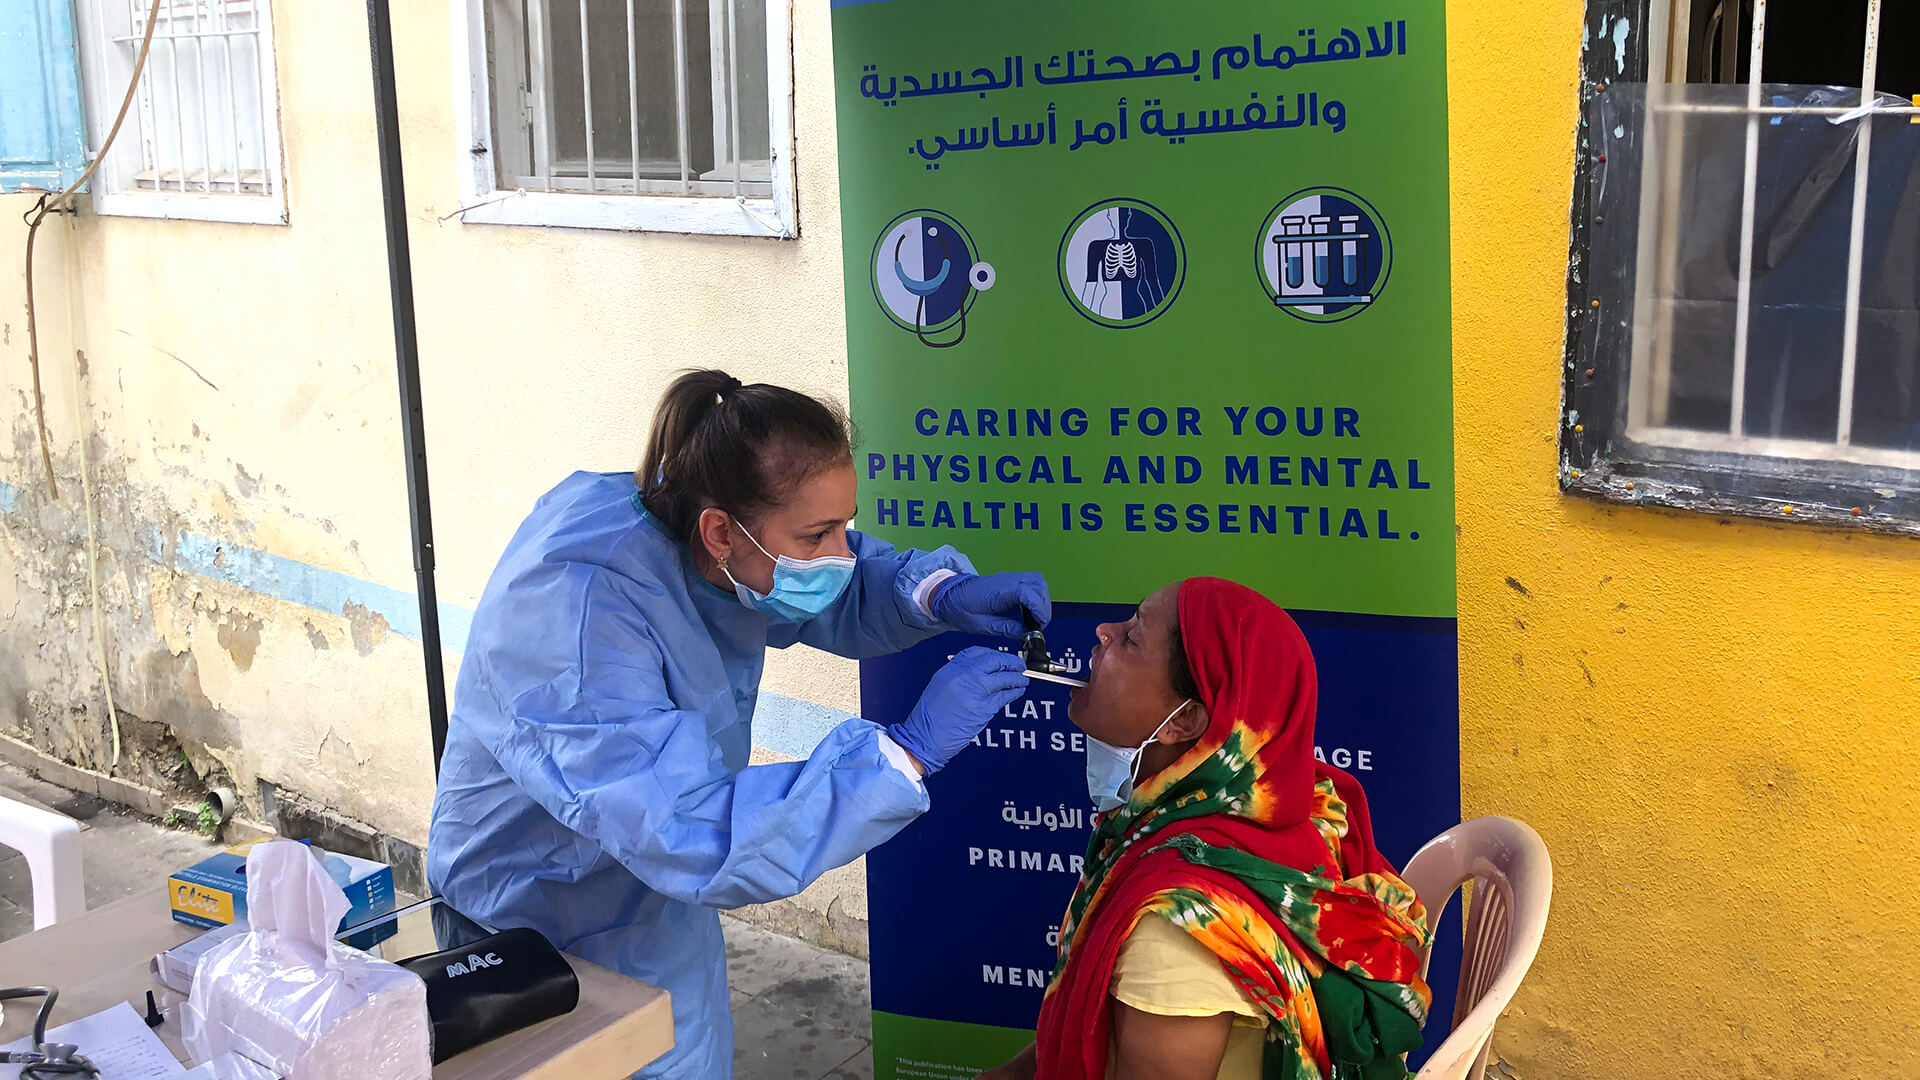 International Medical Corps deployed a Mobile Medical Unit in Karm El Zaytoun to provide healthcare to those affected.